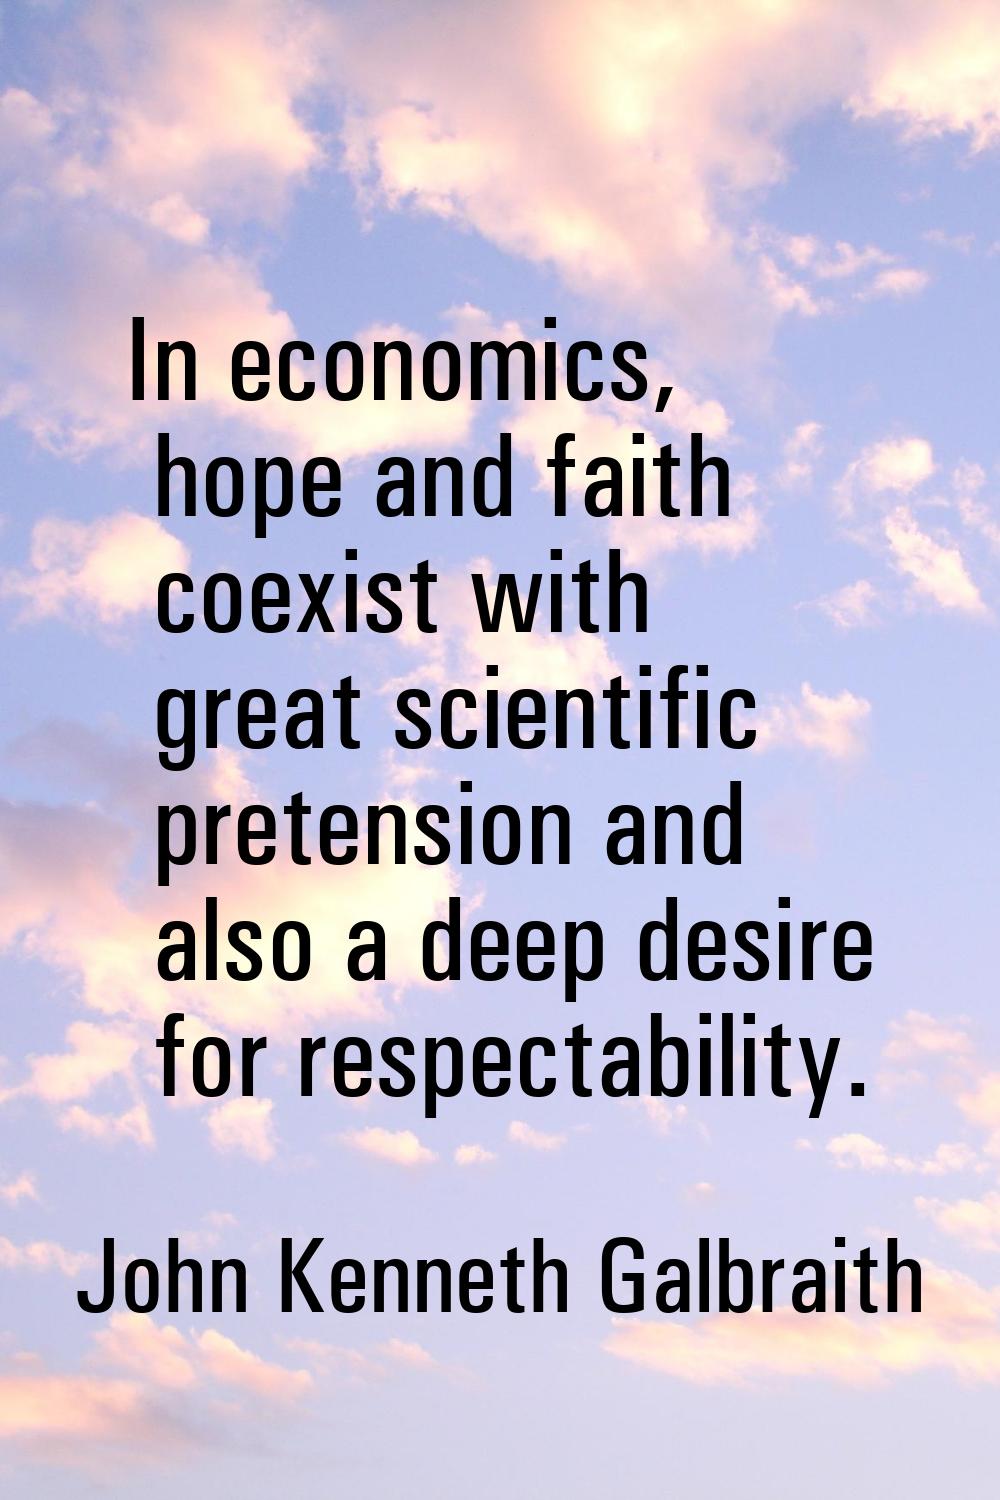 In economics, hope and faith coexist with great scientific pretension and also a deep desire for re